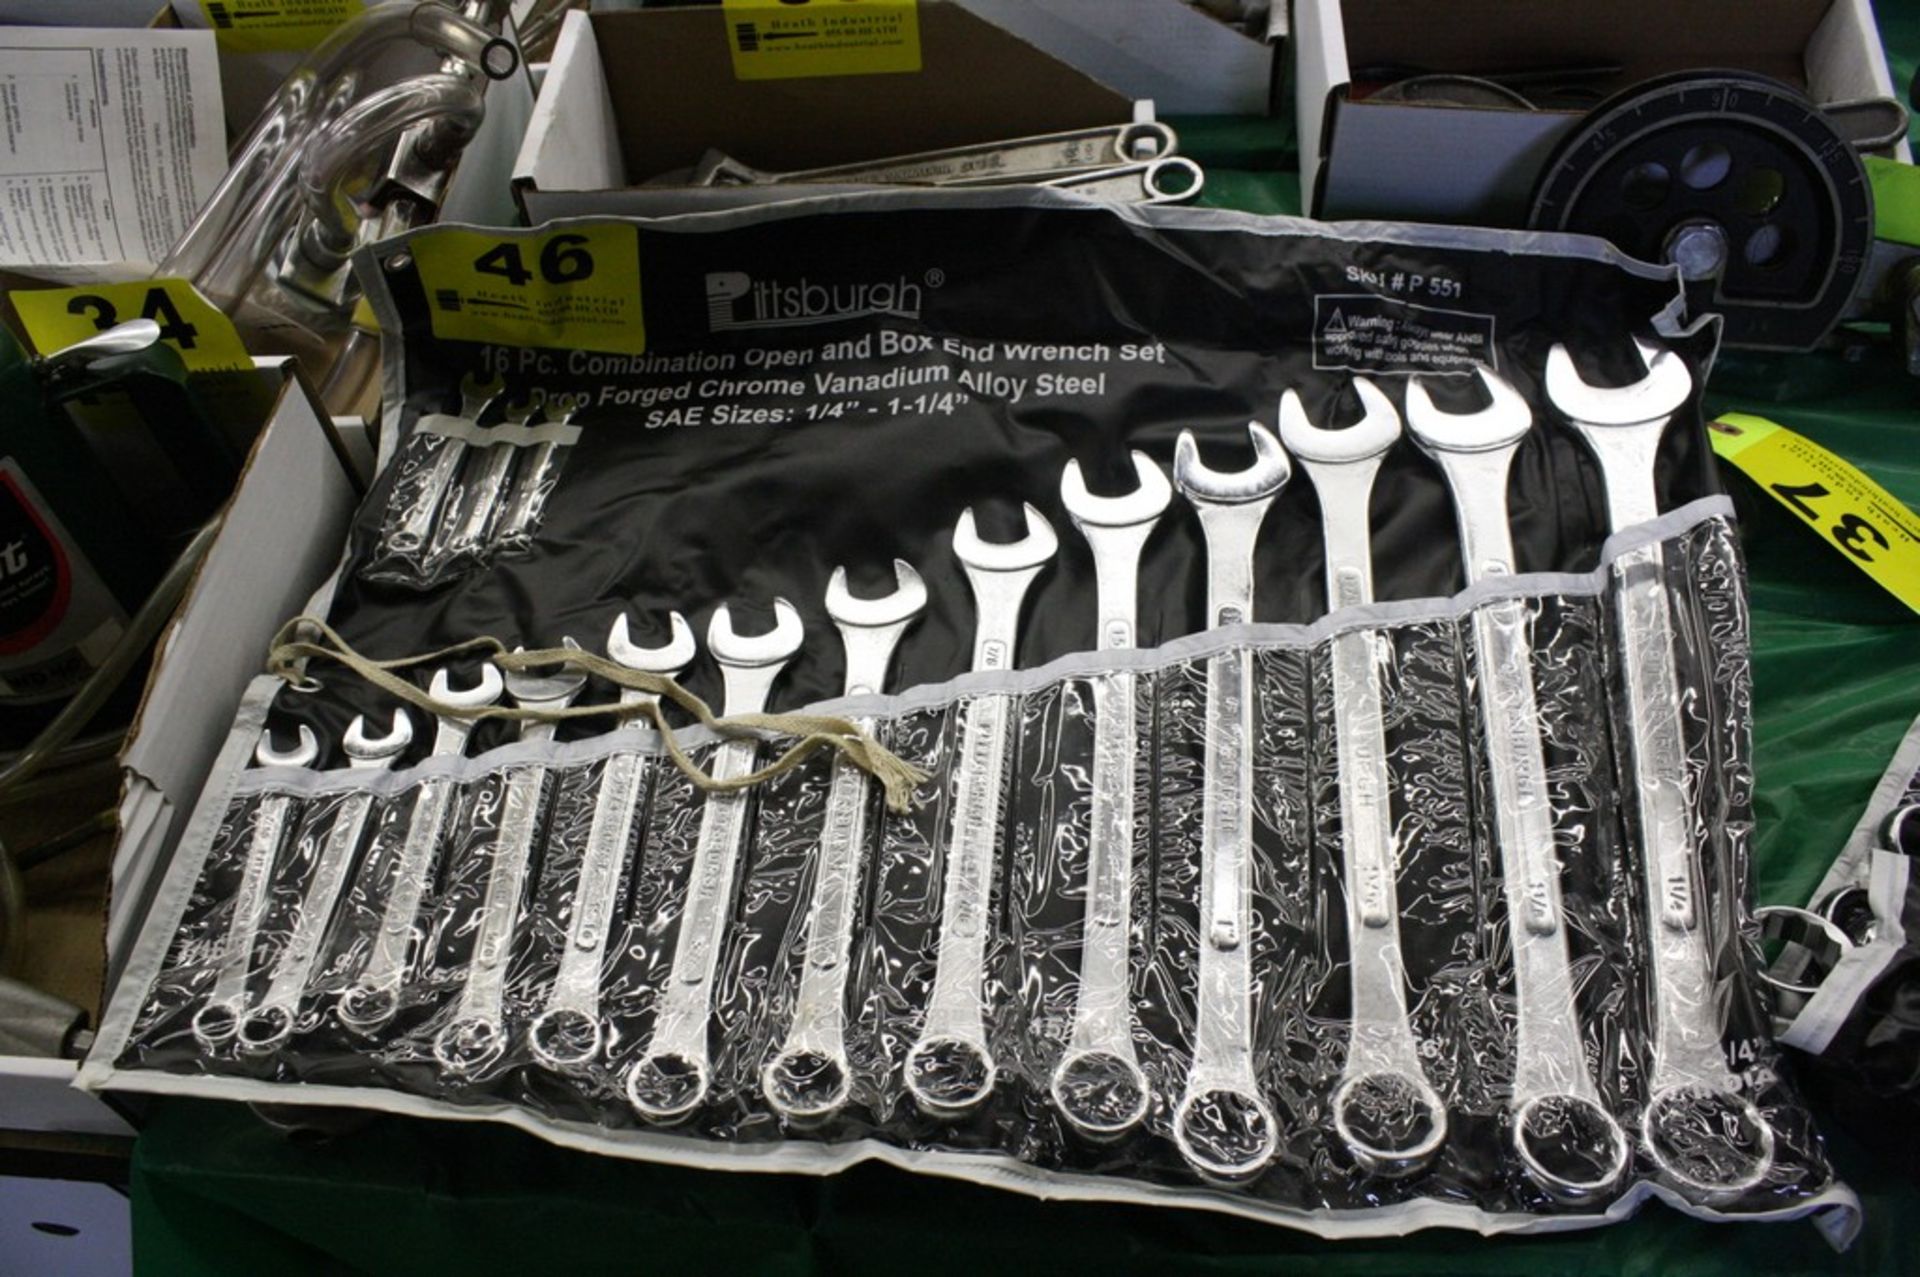 PITTSBURGH 16-PIECE COMBINATION AND BOX END WRENCH SET SAE 1/4'' - 1 1/4''